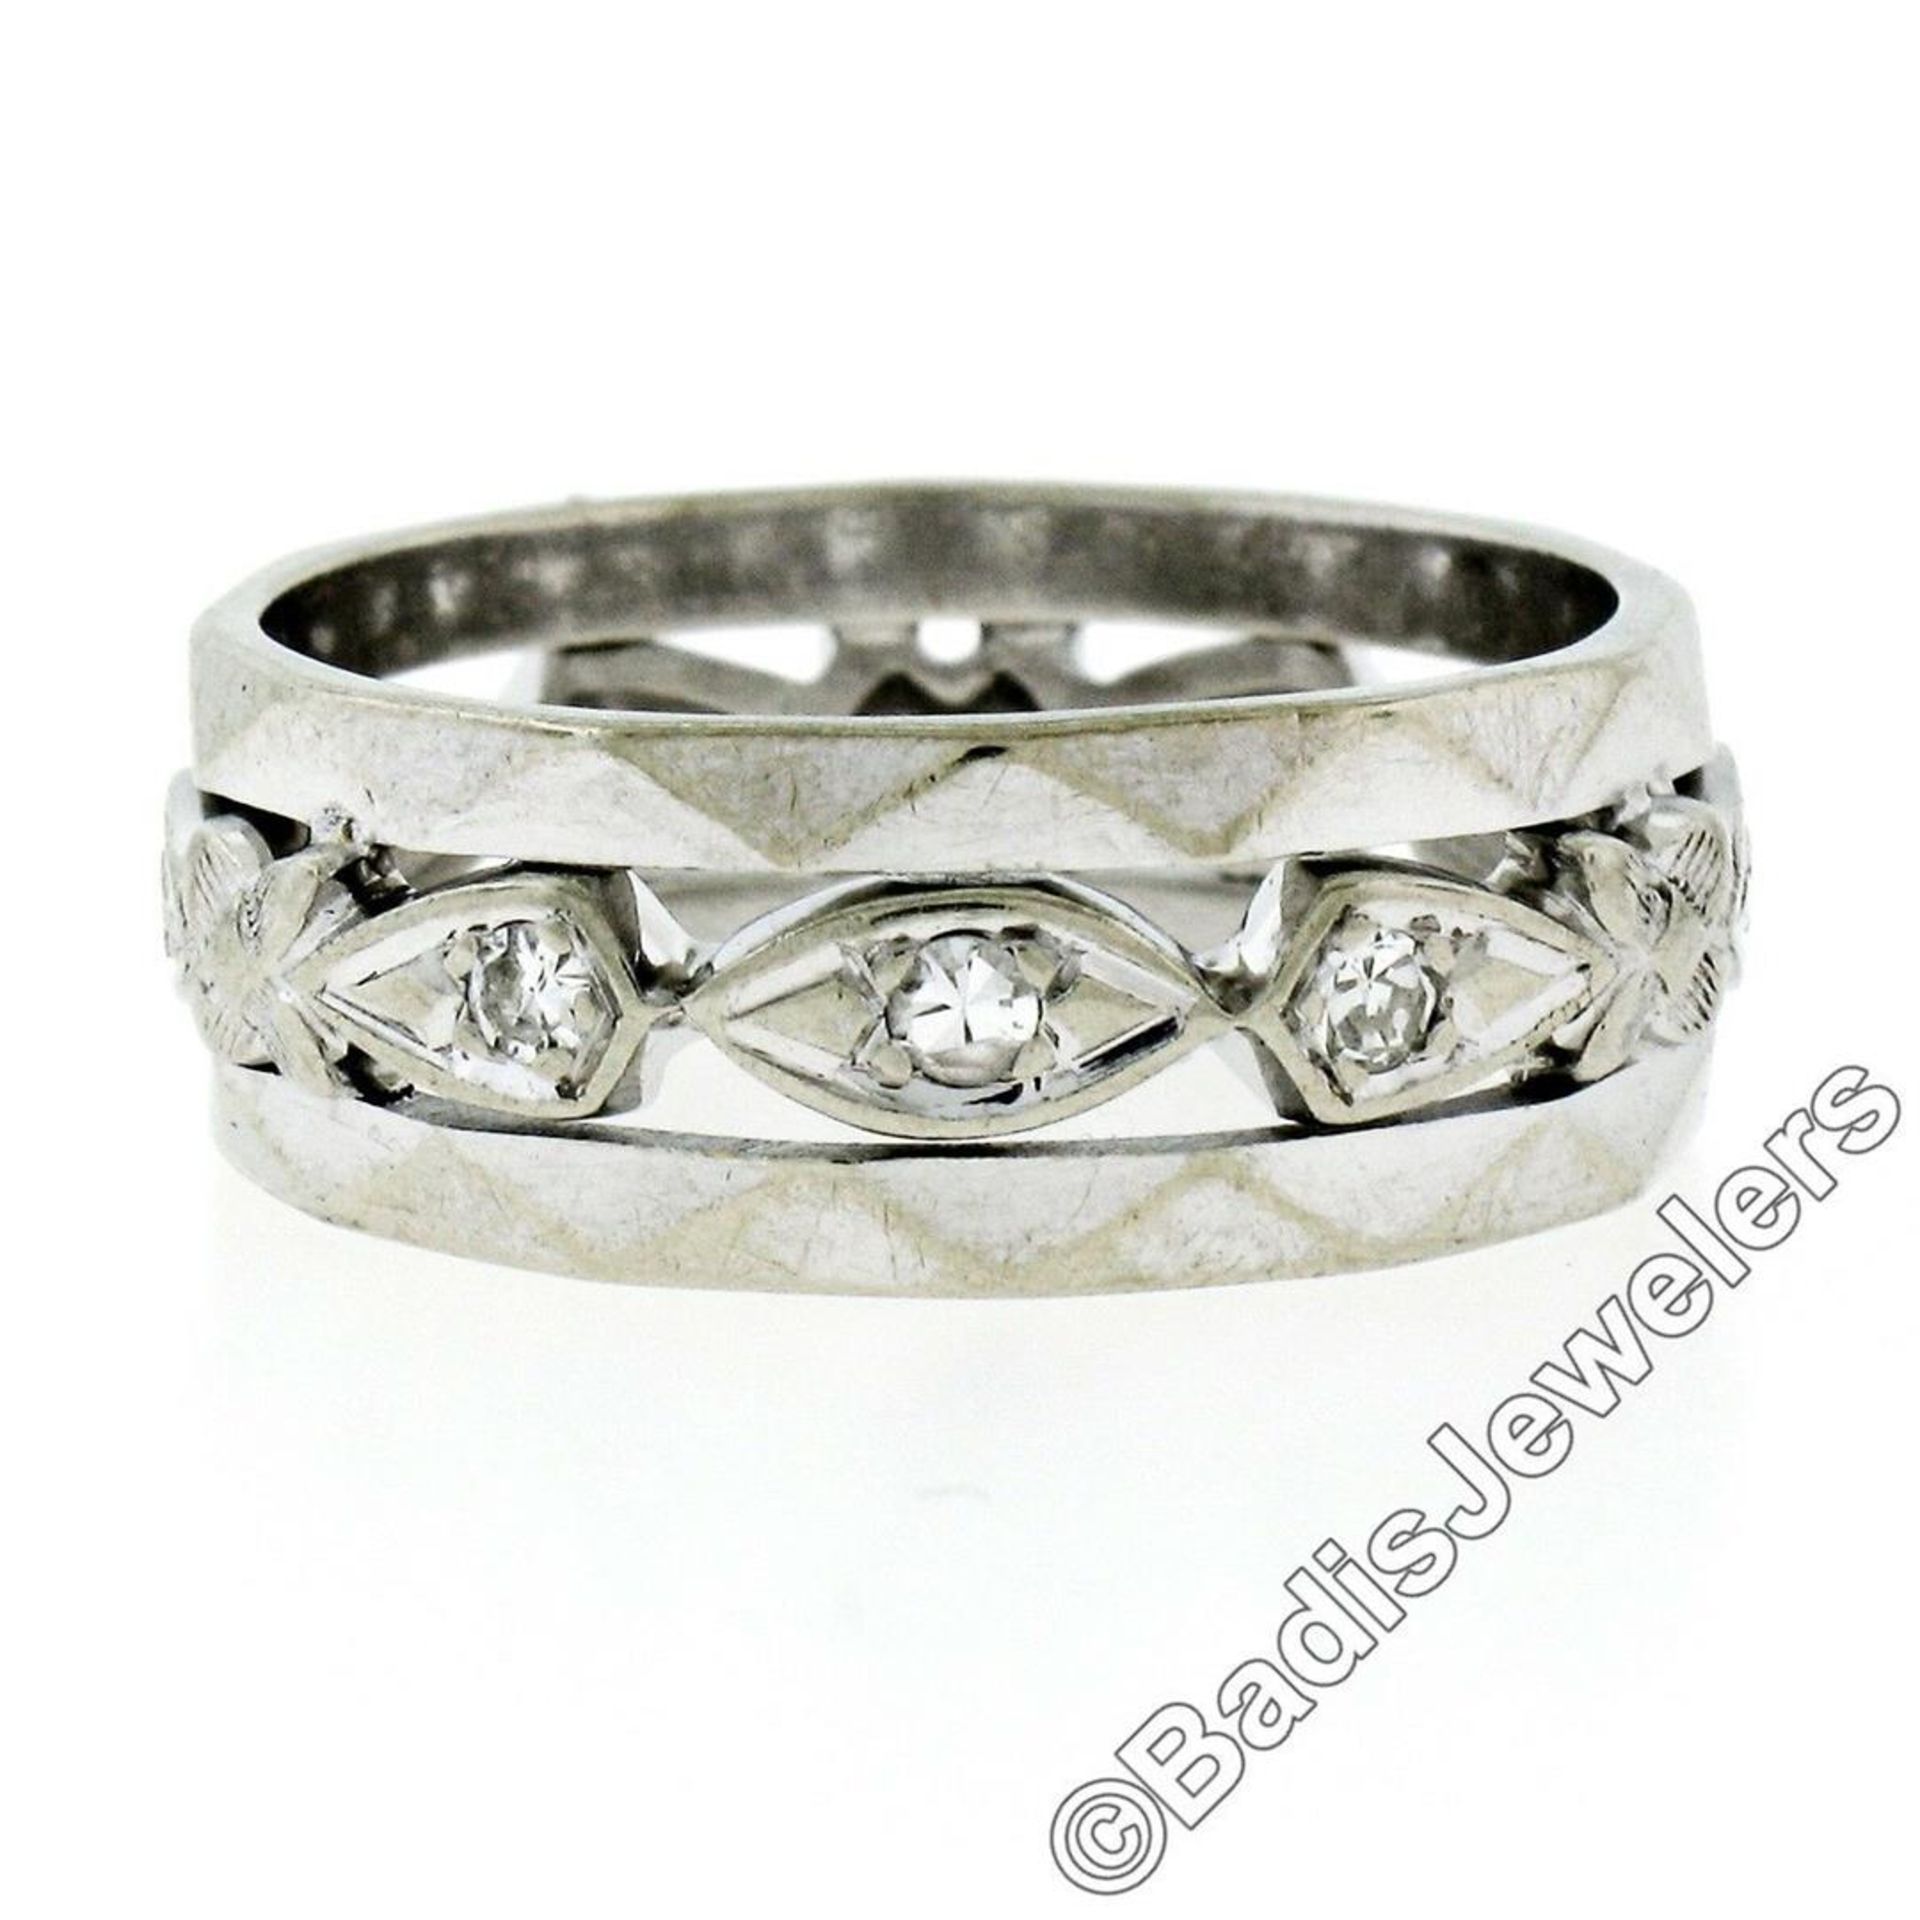 Antique 14kt White Gold 0.20ctw Diamond 7mm Eternity Band Ring - Image 6 of 8